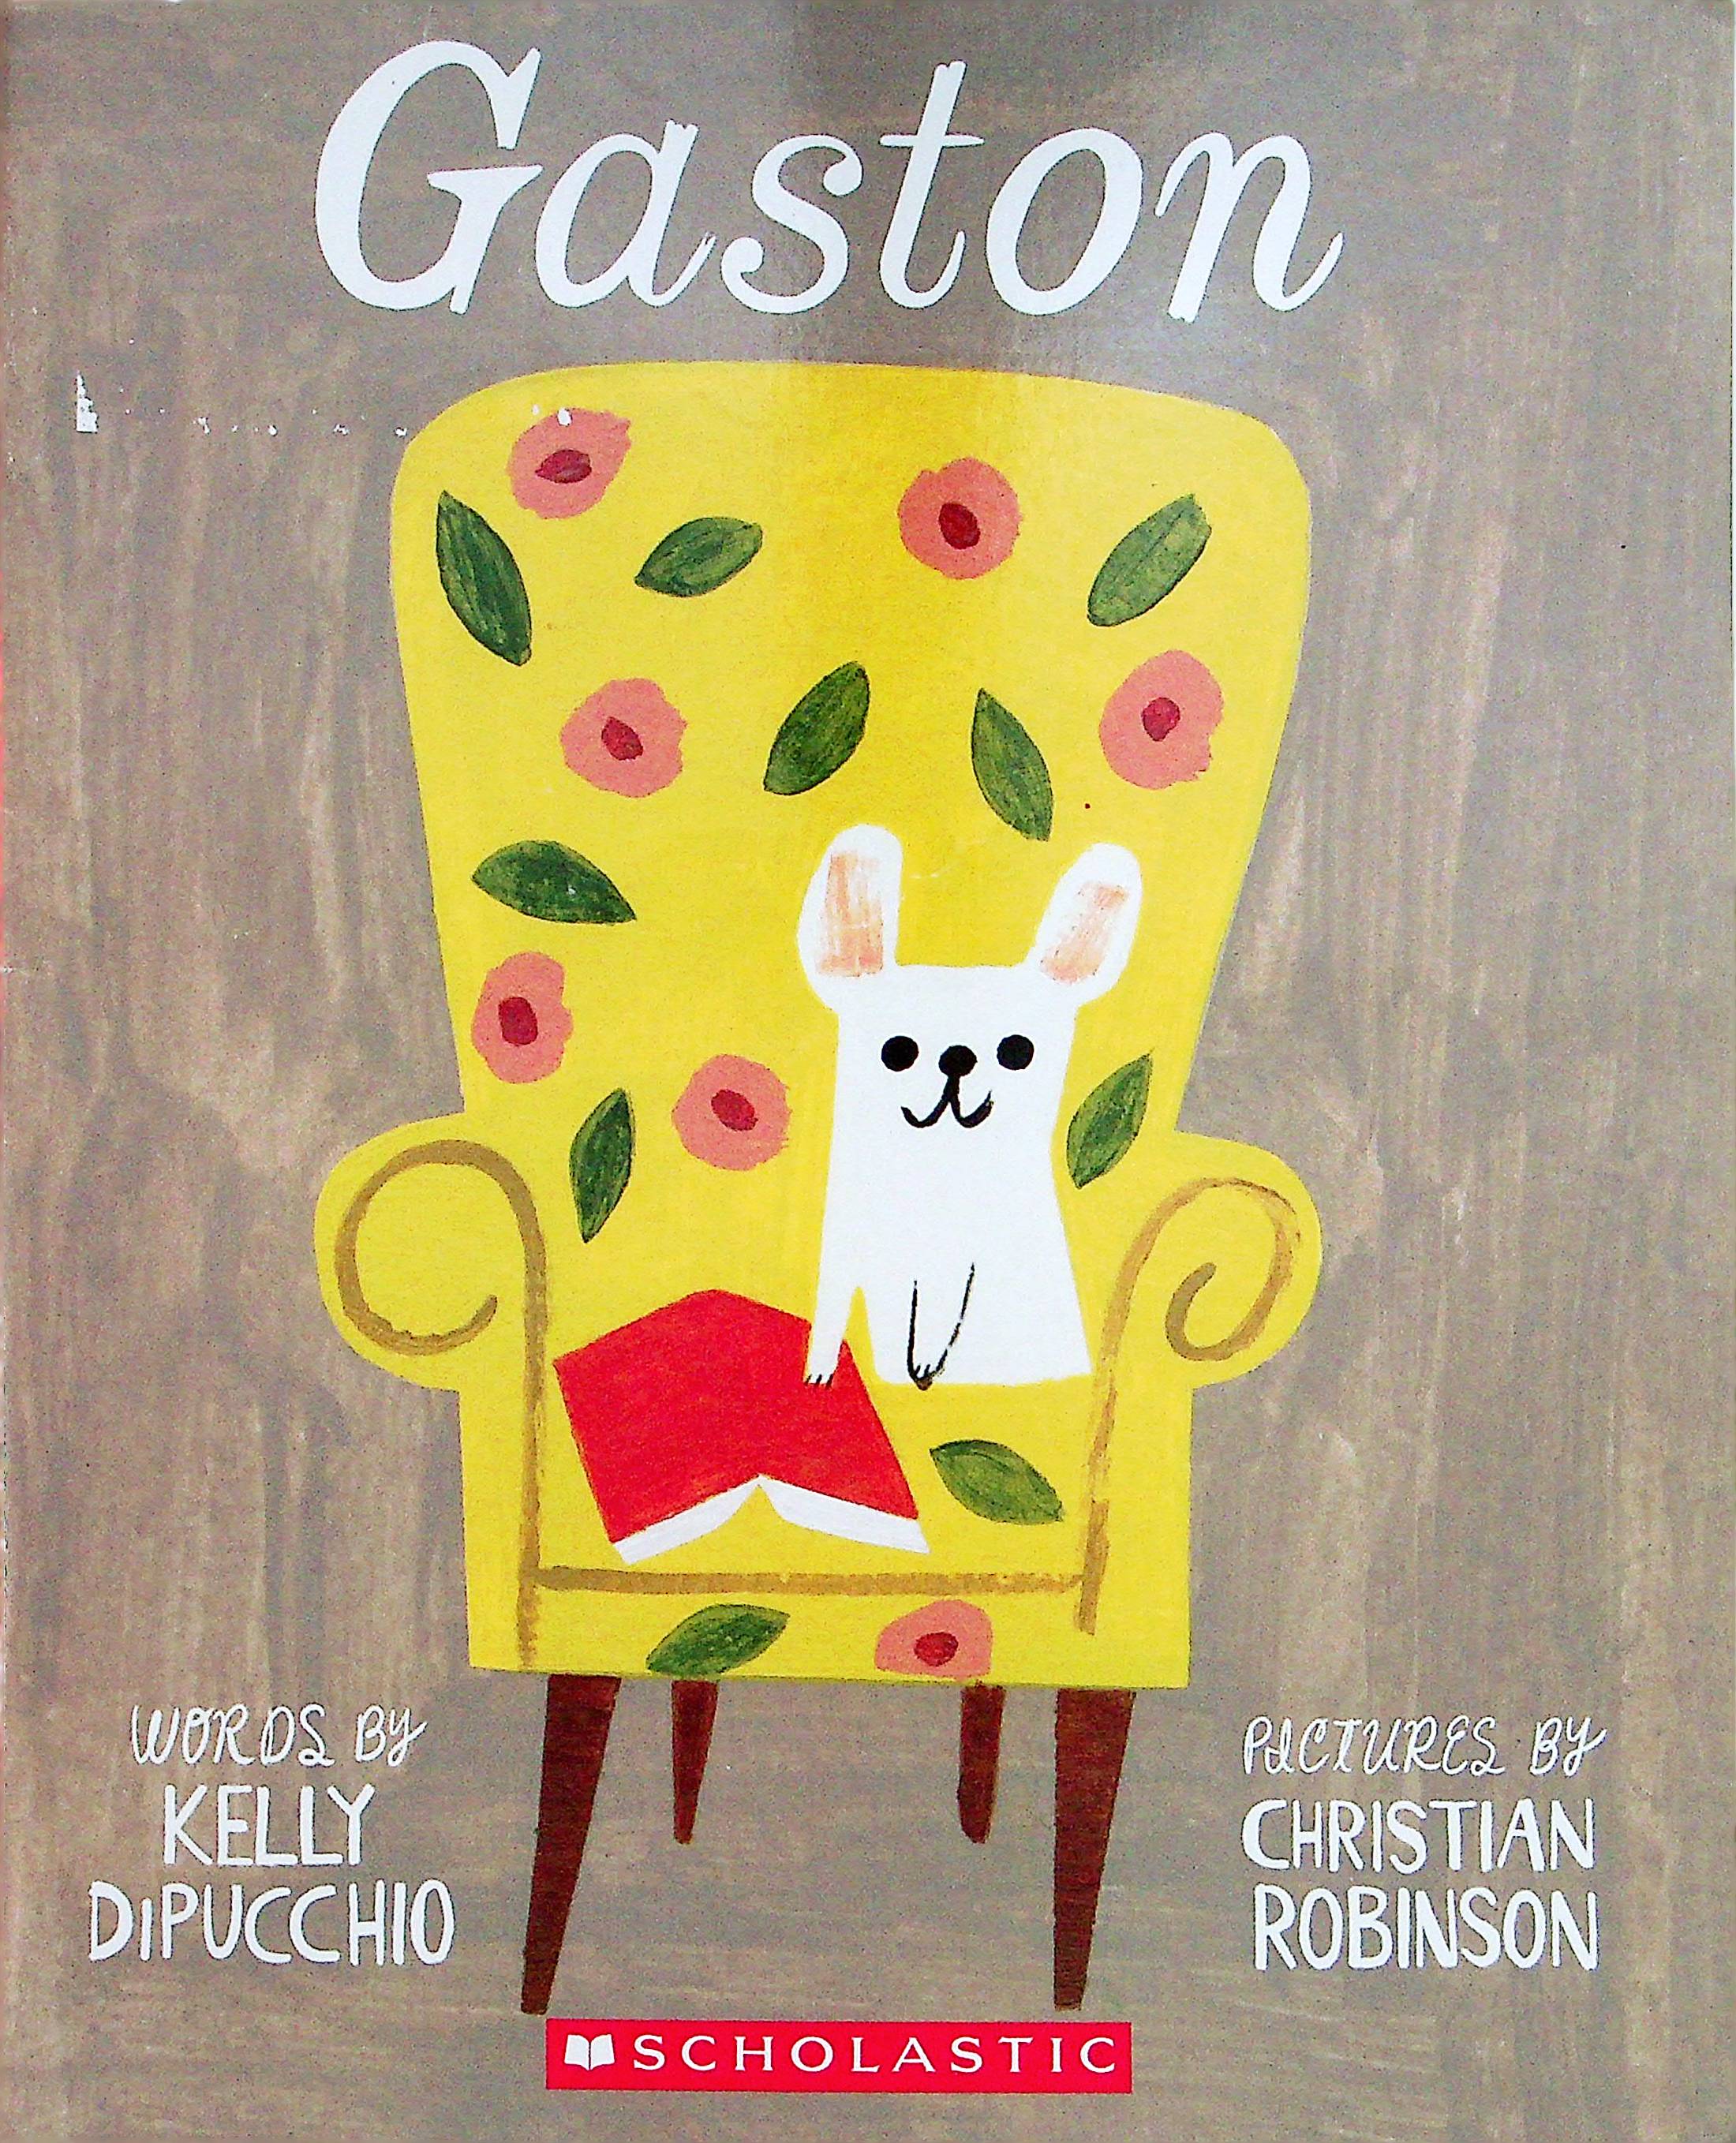 gaston by kelly dipucchio